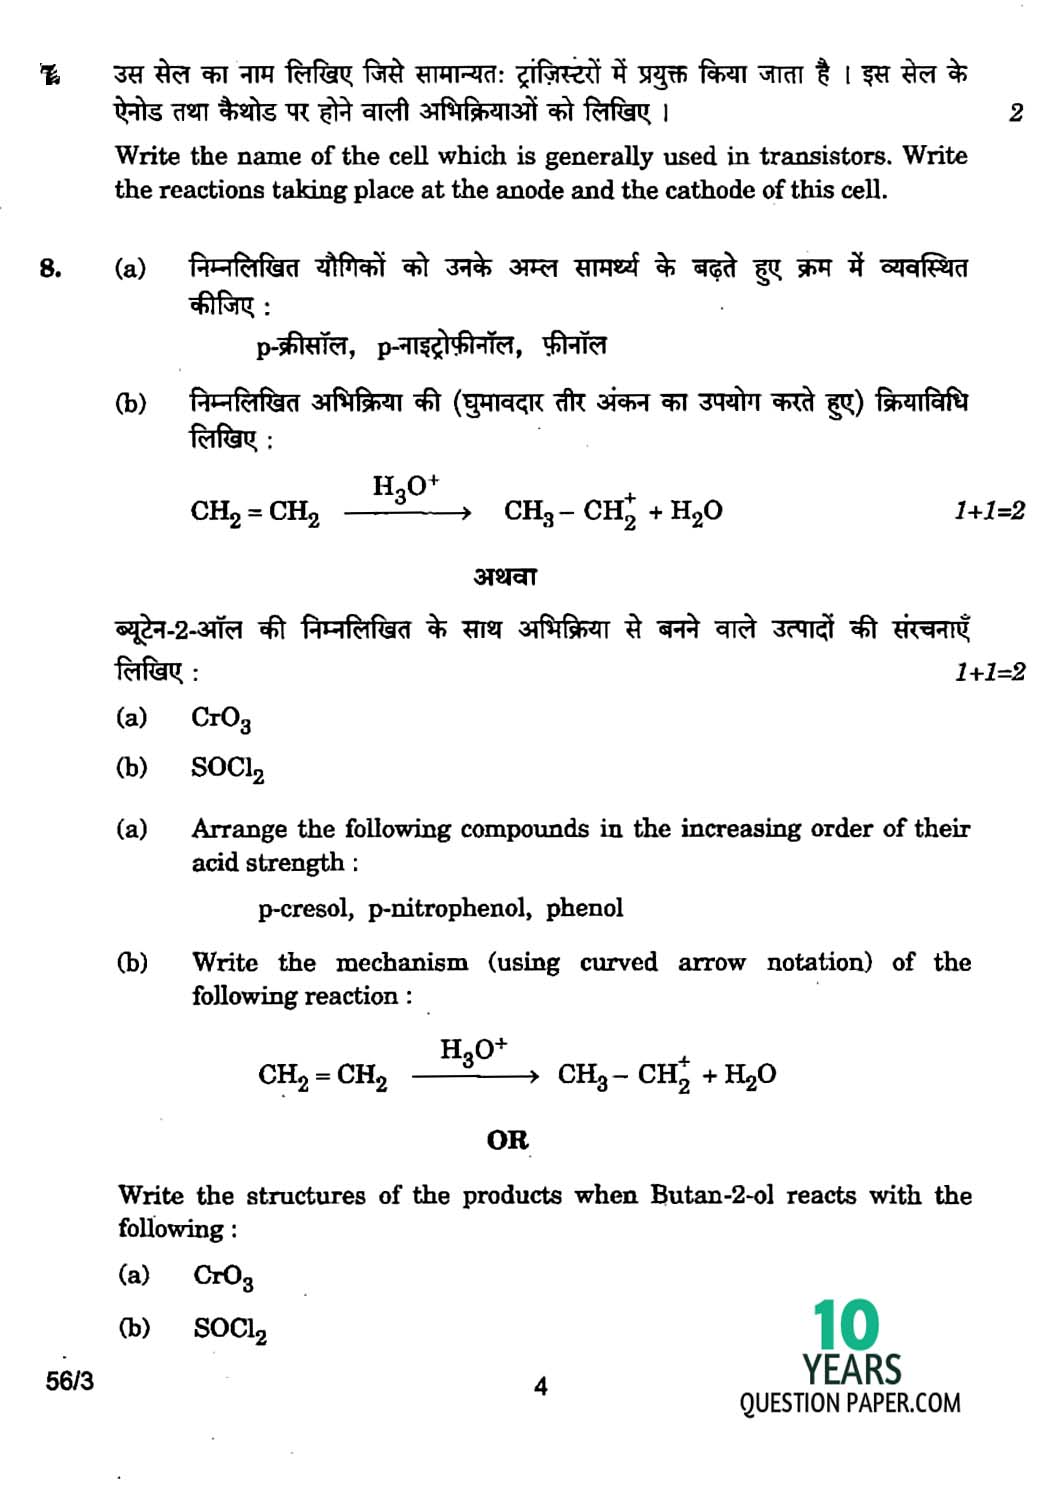 Cbse Class 12th Chemistry Question Paper 2020 Pdf Solutions - Bank2home.com